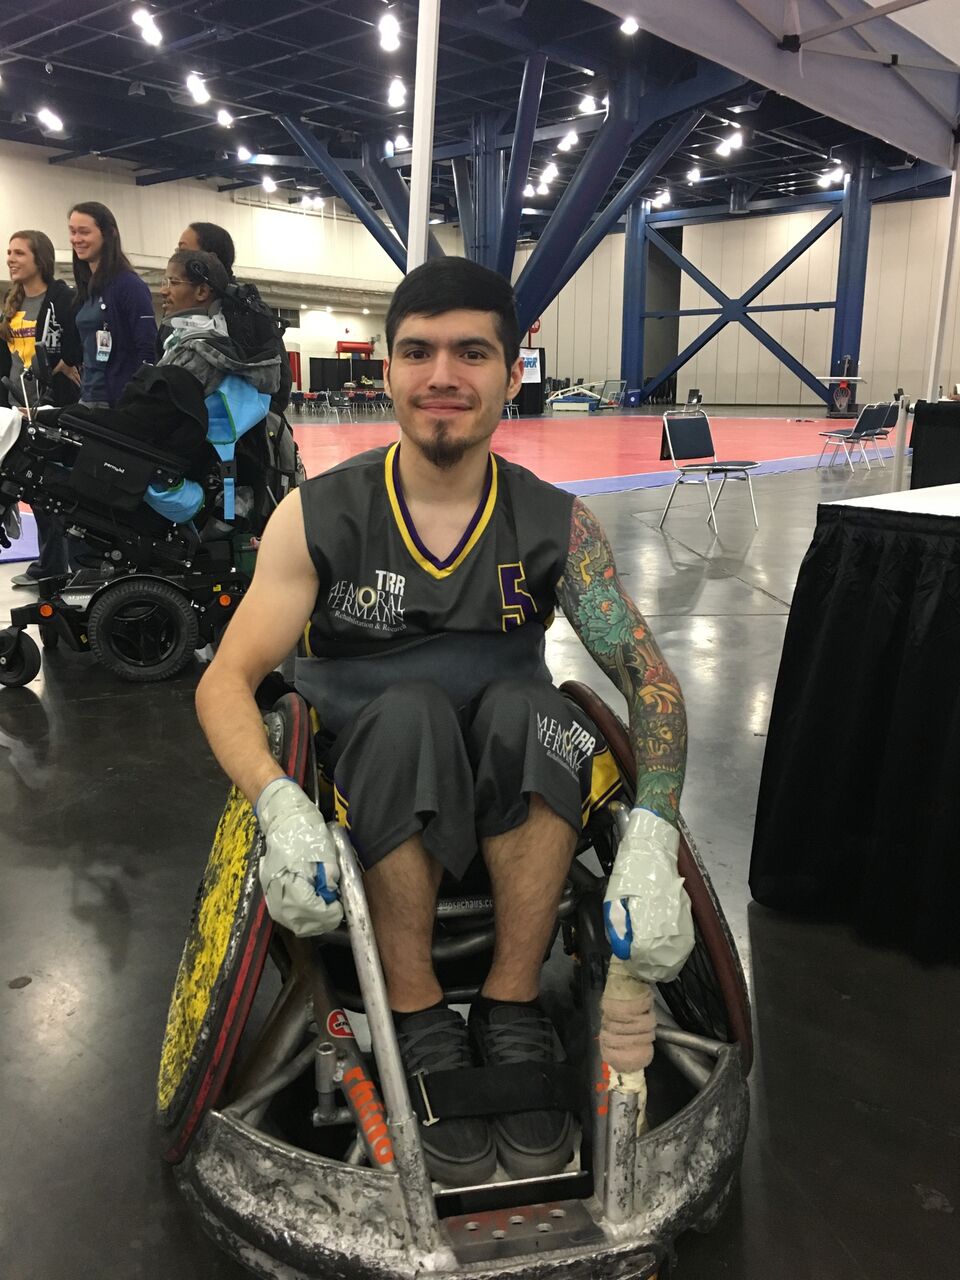 Greg Cortez of Corpus Christi, Texas competing in wheelchair rugby